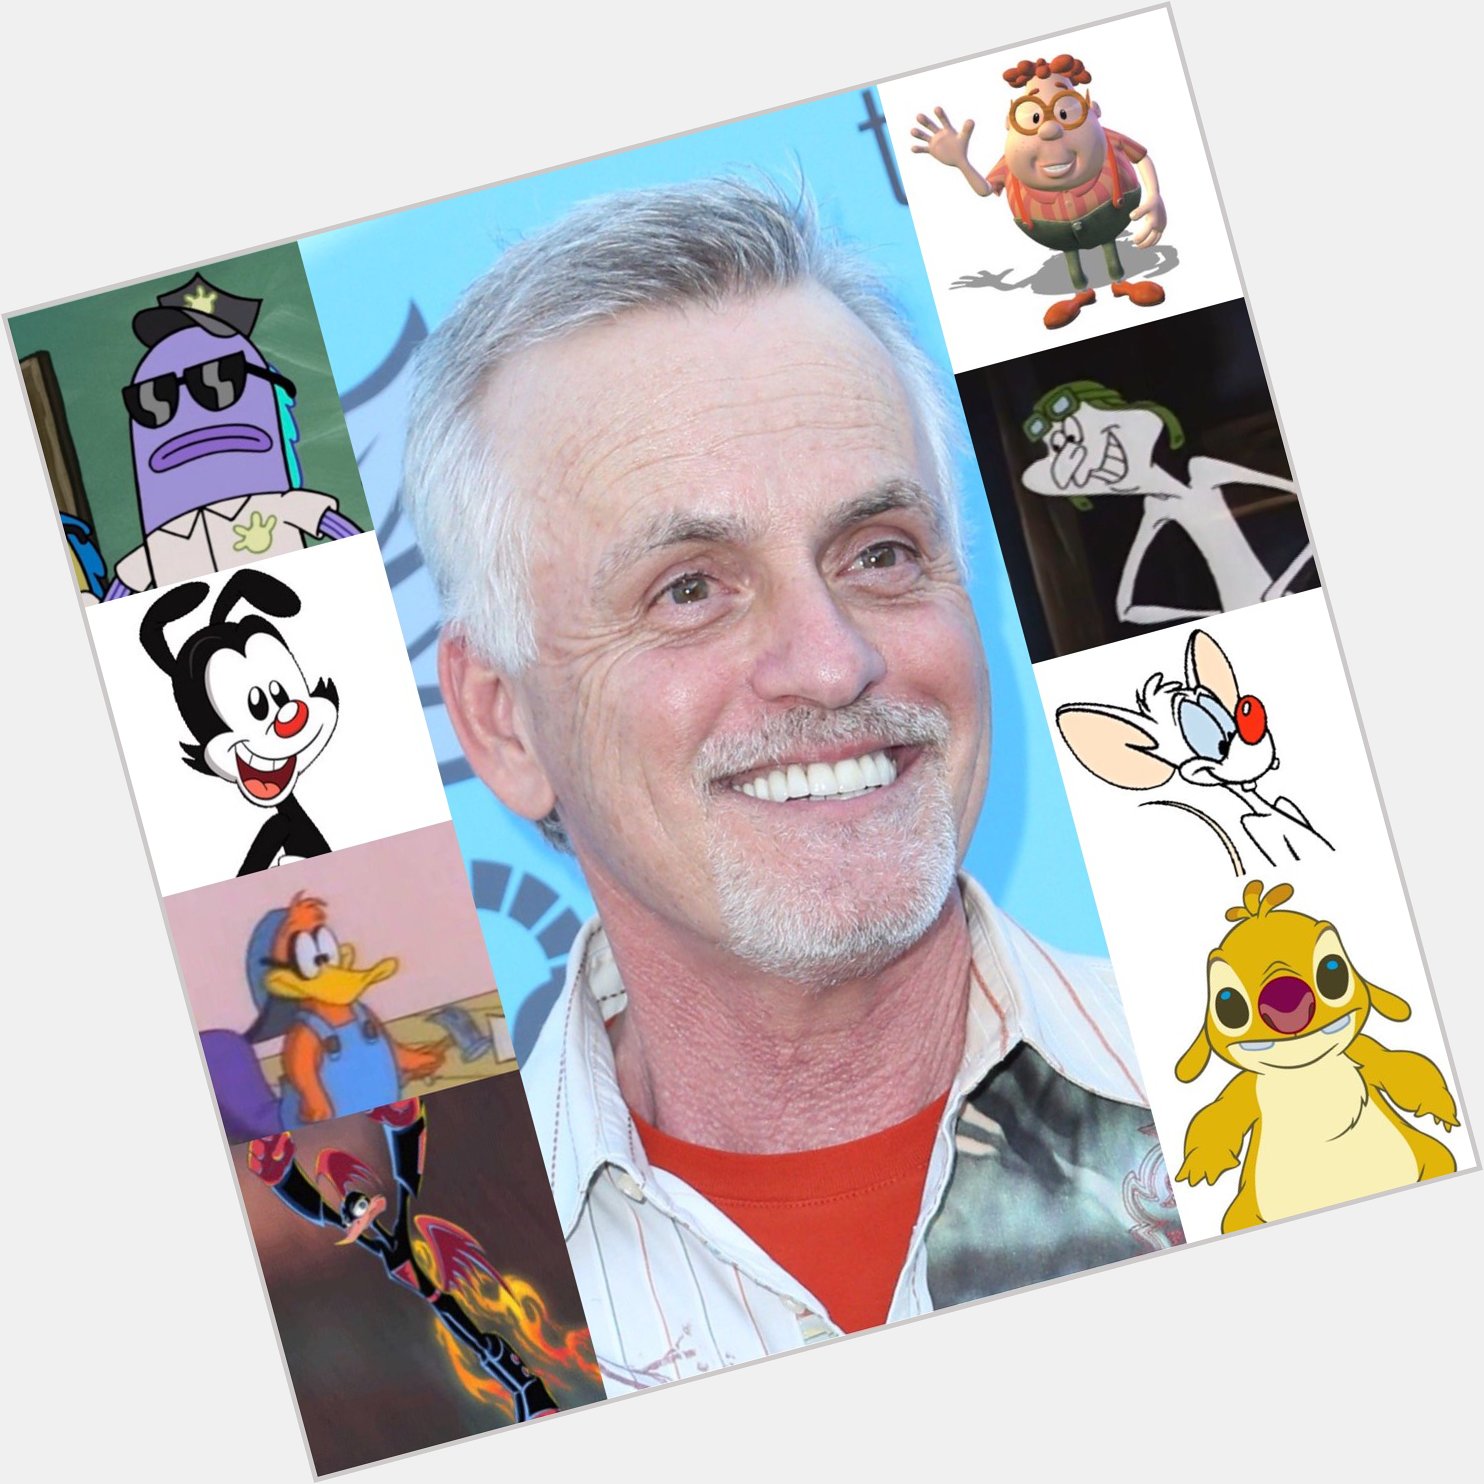 Happy birthday to my favorite childhood voice actor, The Legendary Rob Paulsen! Hope you have an amazing birthday! 